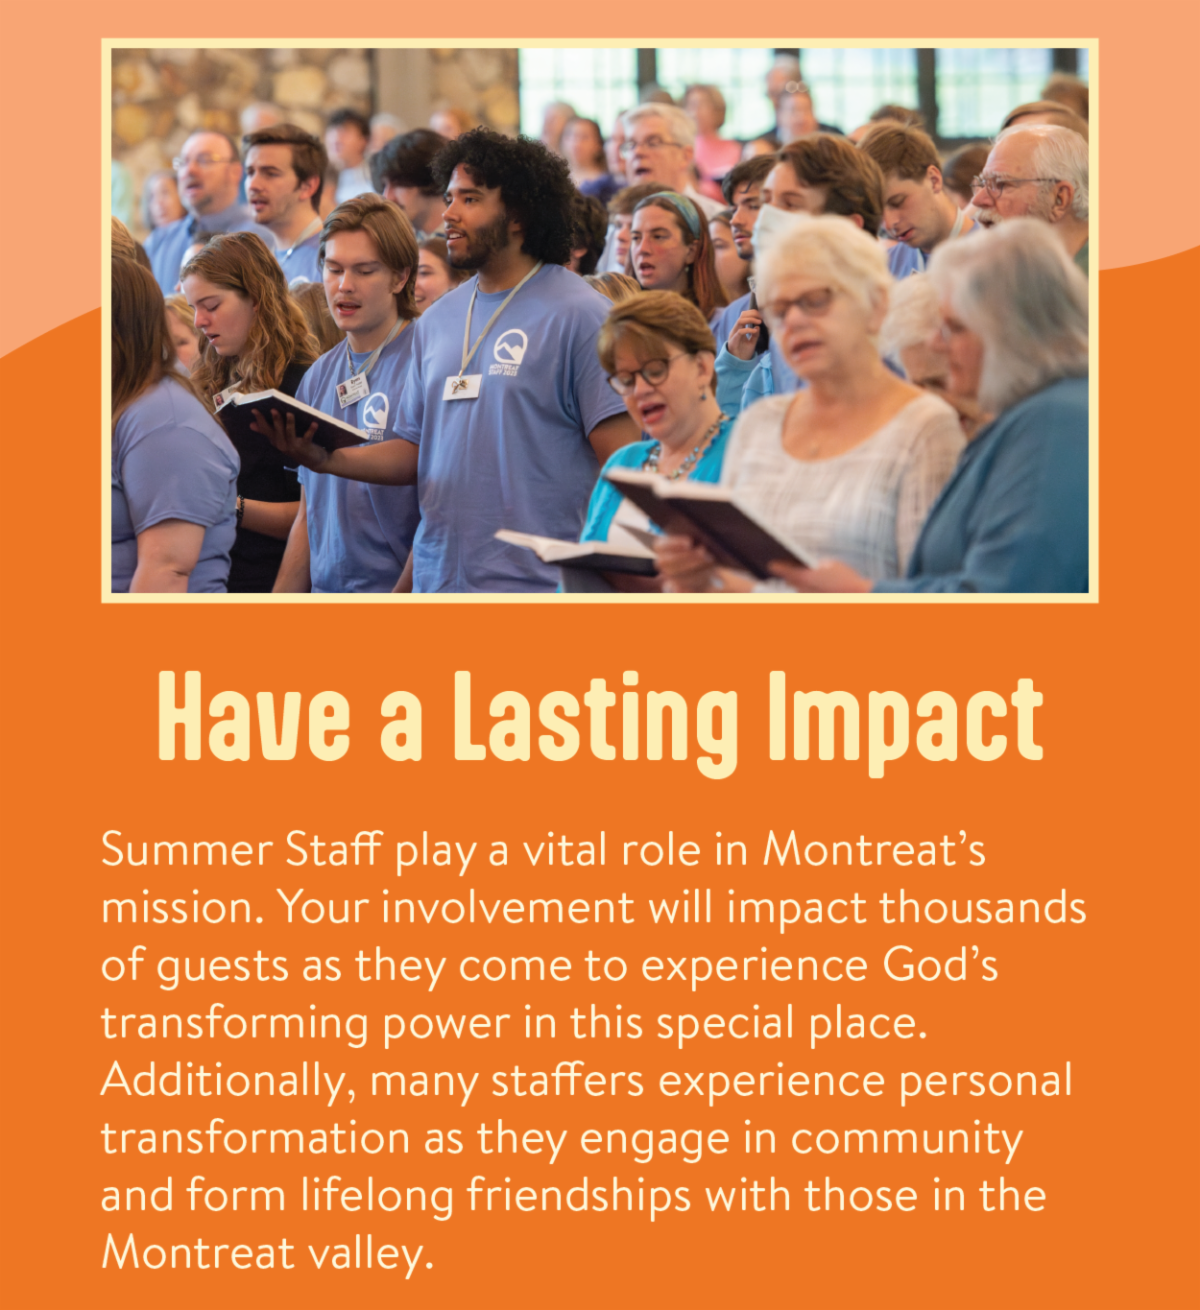 Have a Lasting Impact - Summer Staff play a vital role in Montreat’s mission. Your involvement will impact thousands of guests as they come to experience God’s transforming power in this special place. Additionally, many staffers experience personal transformation as they engage in community and form lifelong friendships with those in the Montreat valley.